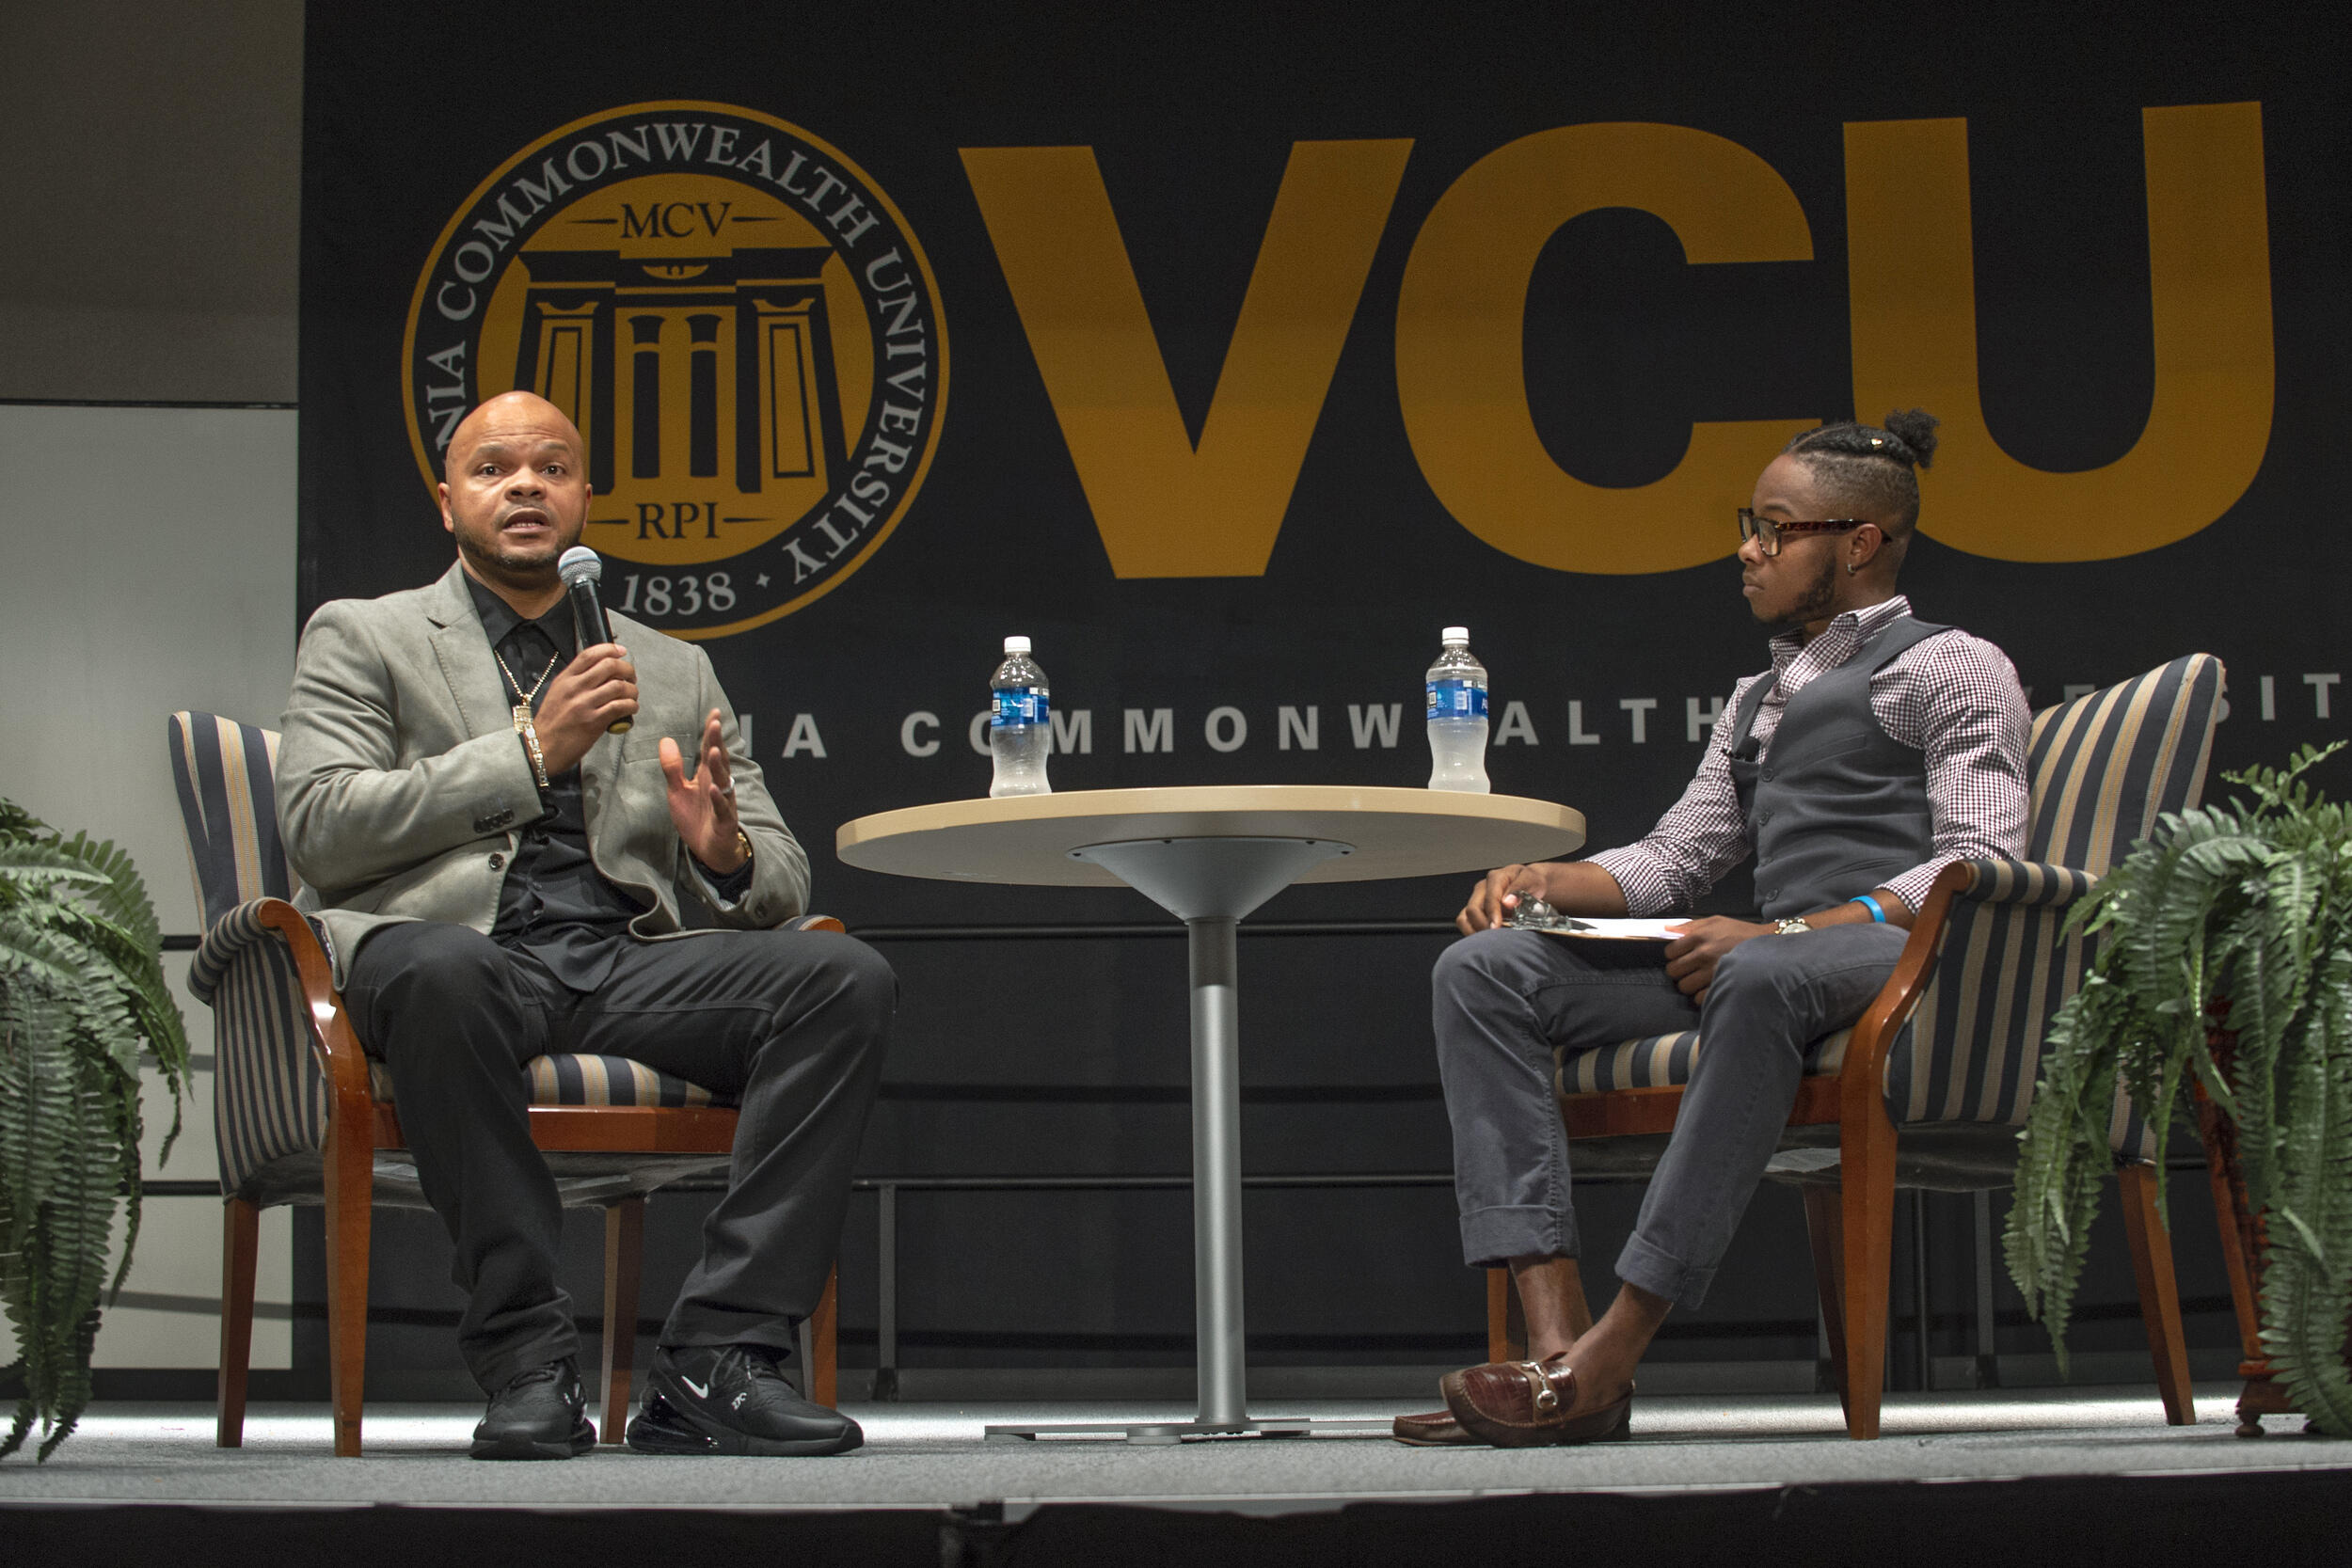 Kevin Richardson, left, addressing the audience. An event moderator sits in the seat on the right with a table is placed between the two chairs. The V C U logo is displayed behind the two people.